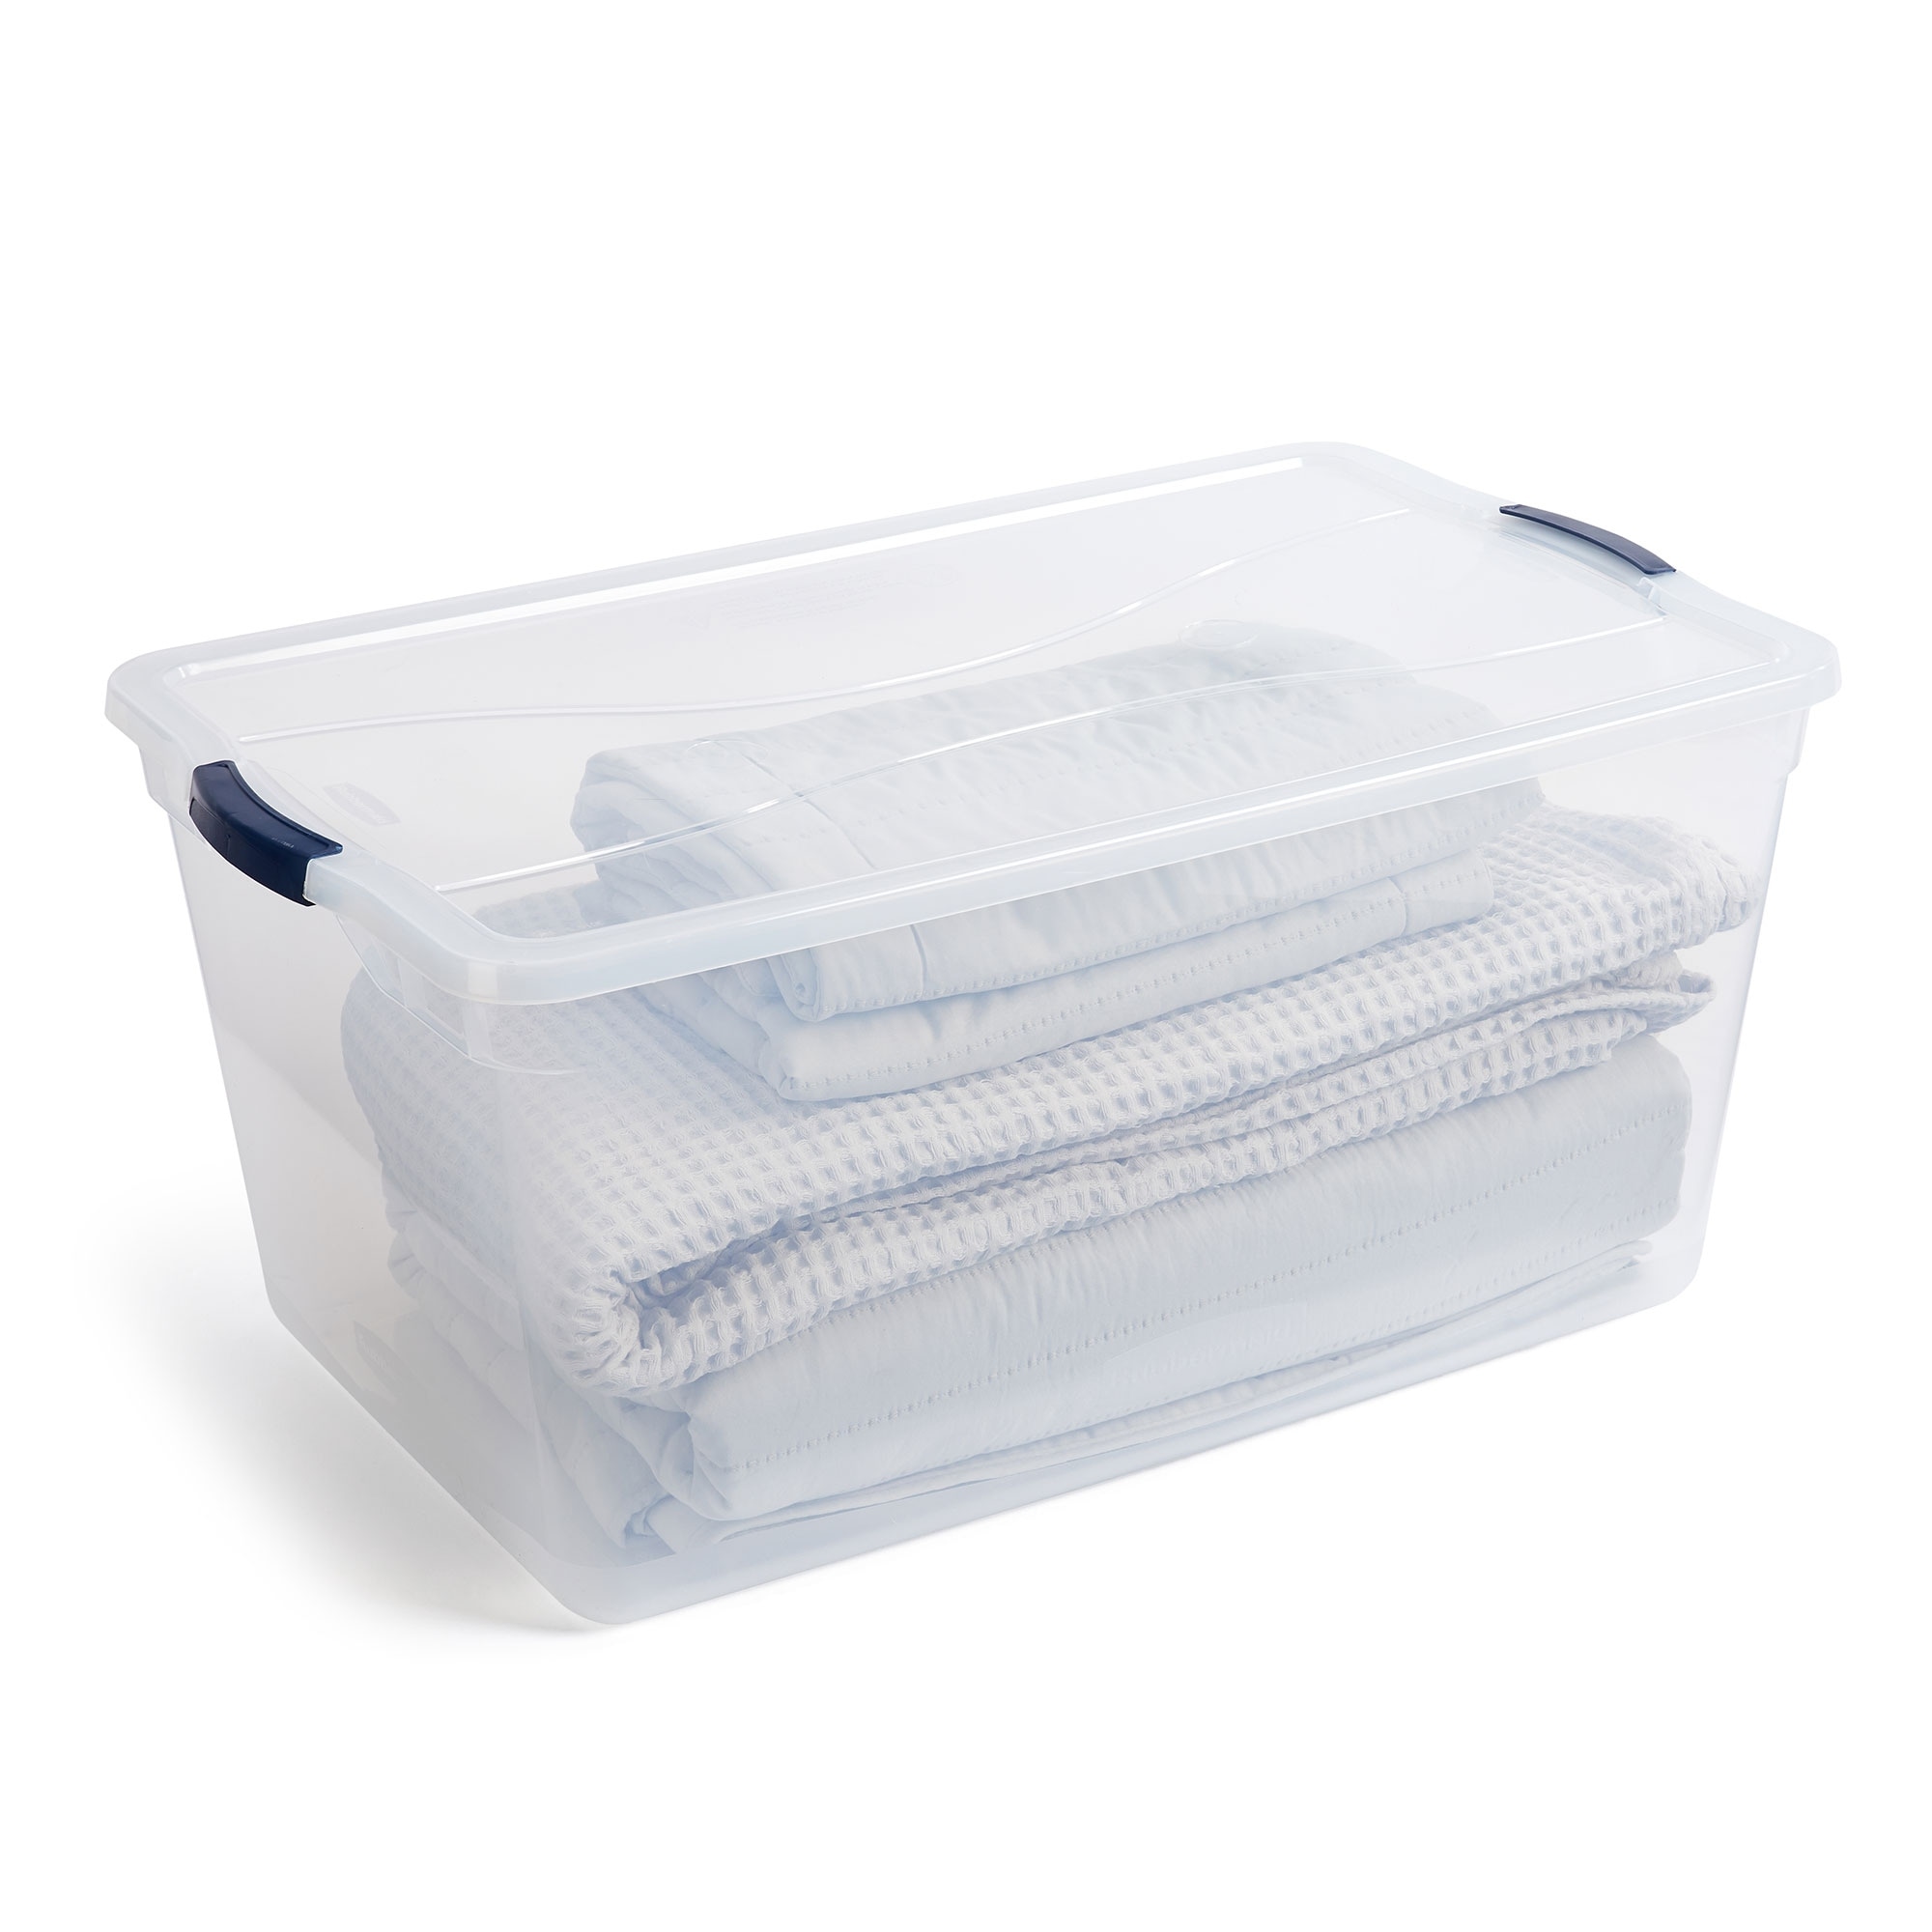 https://ak1.ostkcdn.com/images/products/is/images/direct/1163c1cdeb789258f33f406d5c5d5e8ca15de857/Rubbermaid-Cleverstore-95-Quart-Clear-Plastic-Storage-Container-%26-Lid%2C-%284-Pack%29.jpg